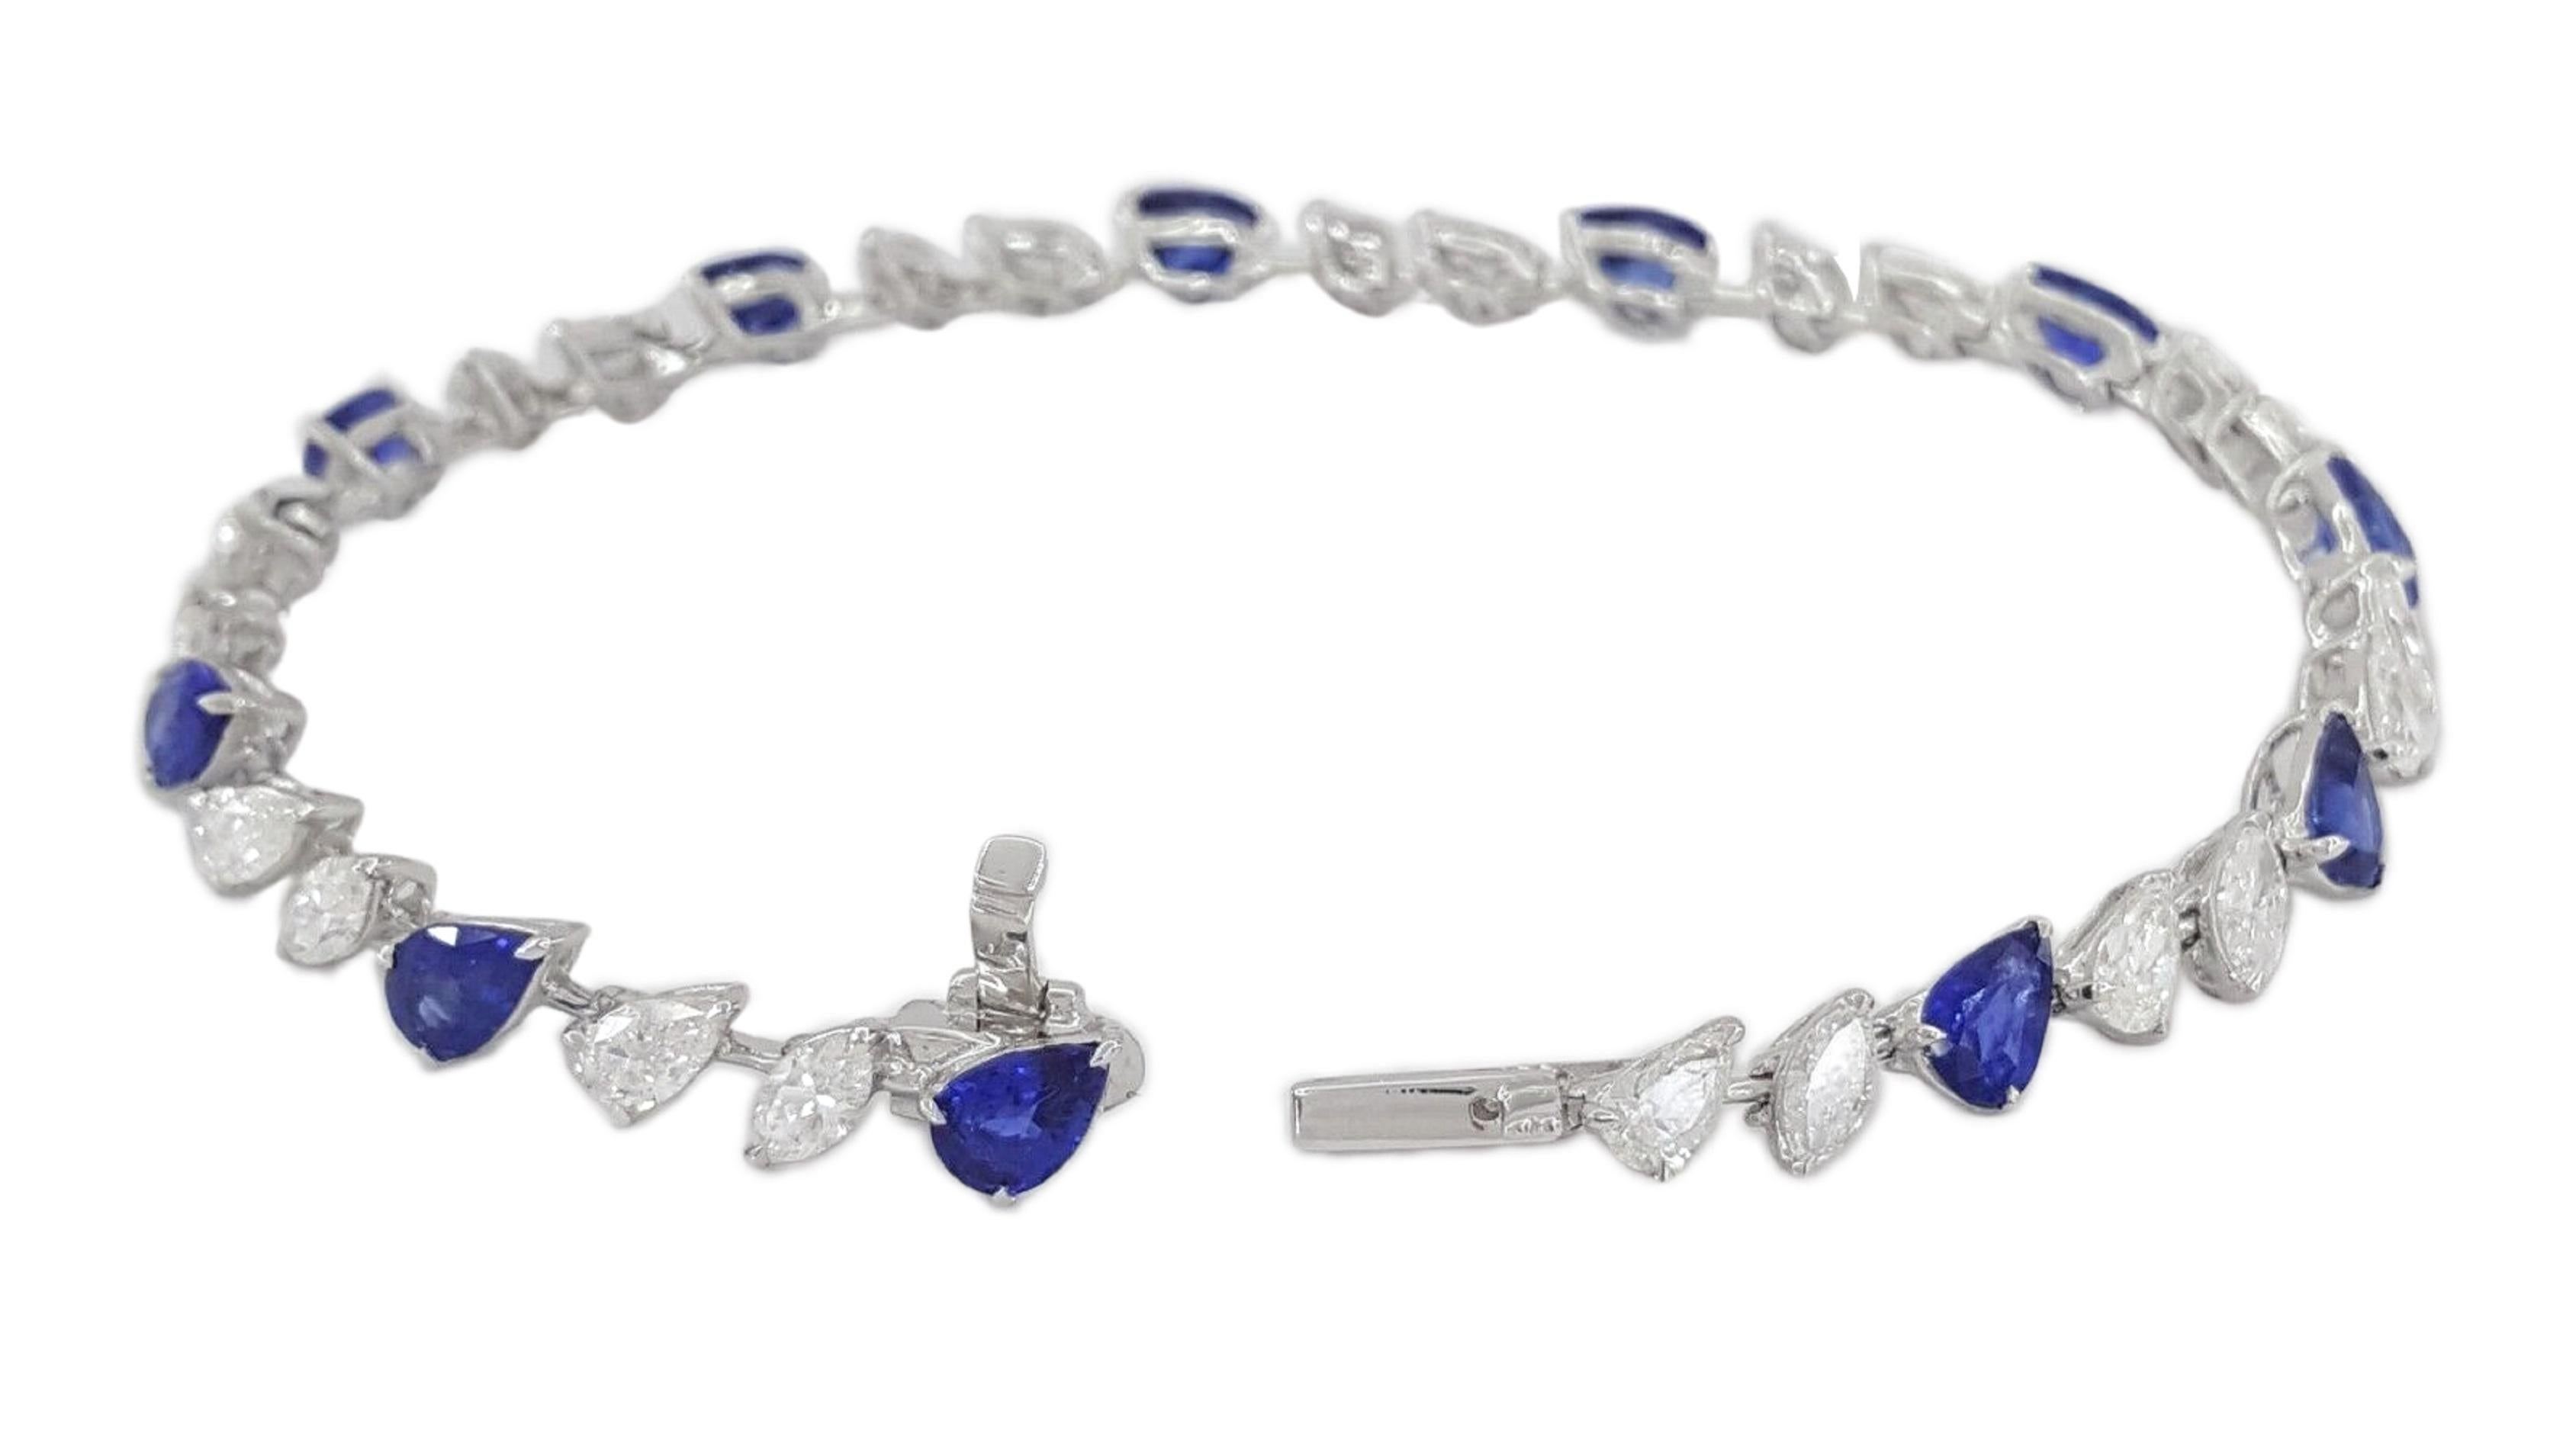 An exquisite and refined tennis bracelet composed by approximately 1.60 carats of natural pear cut diamonds, 1.62 carats of natural marquise cut diamonds, approximately 6 carats of pear royal blue sapphires set in 18 carats white gold.